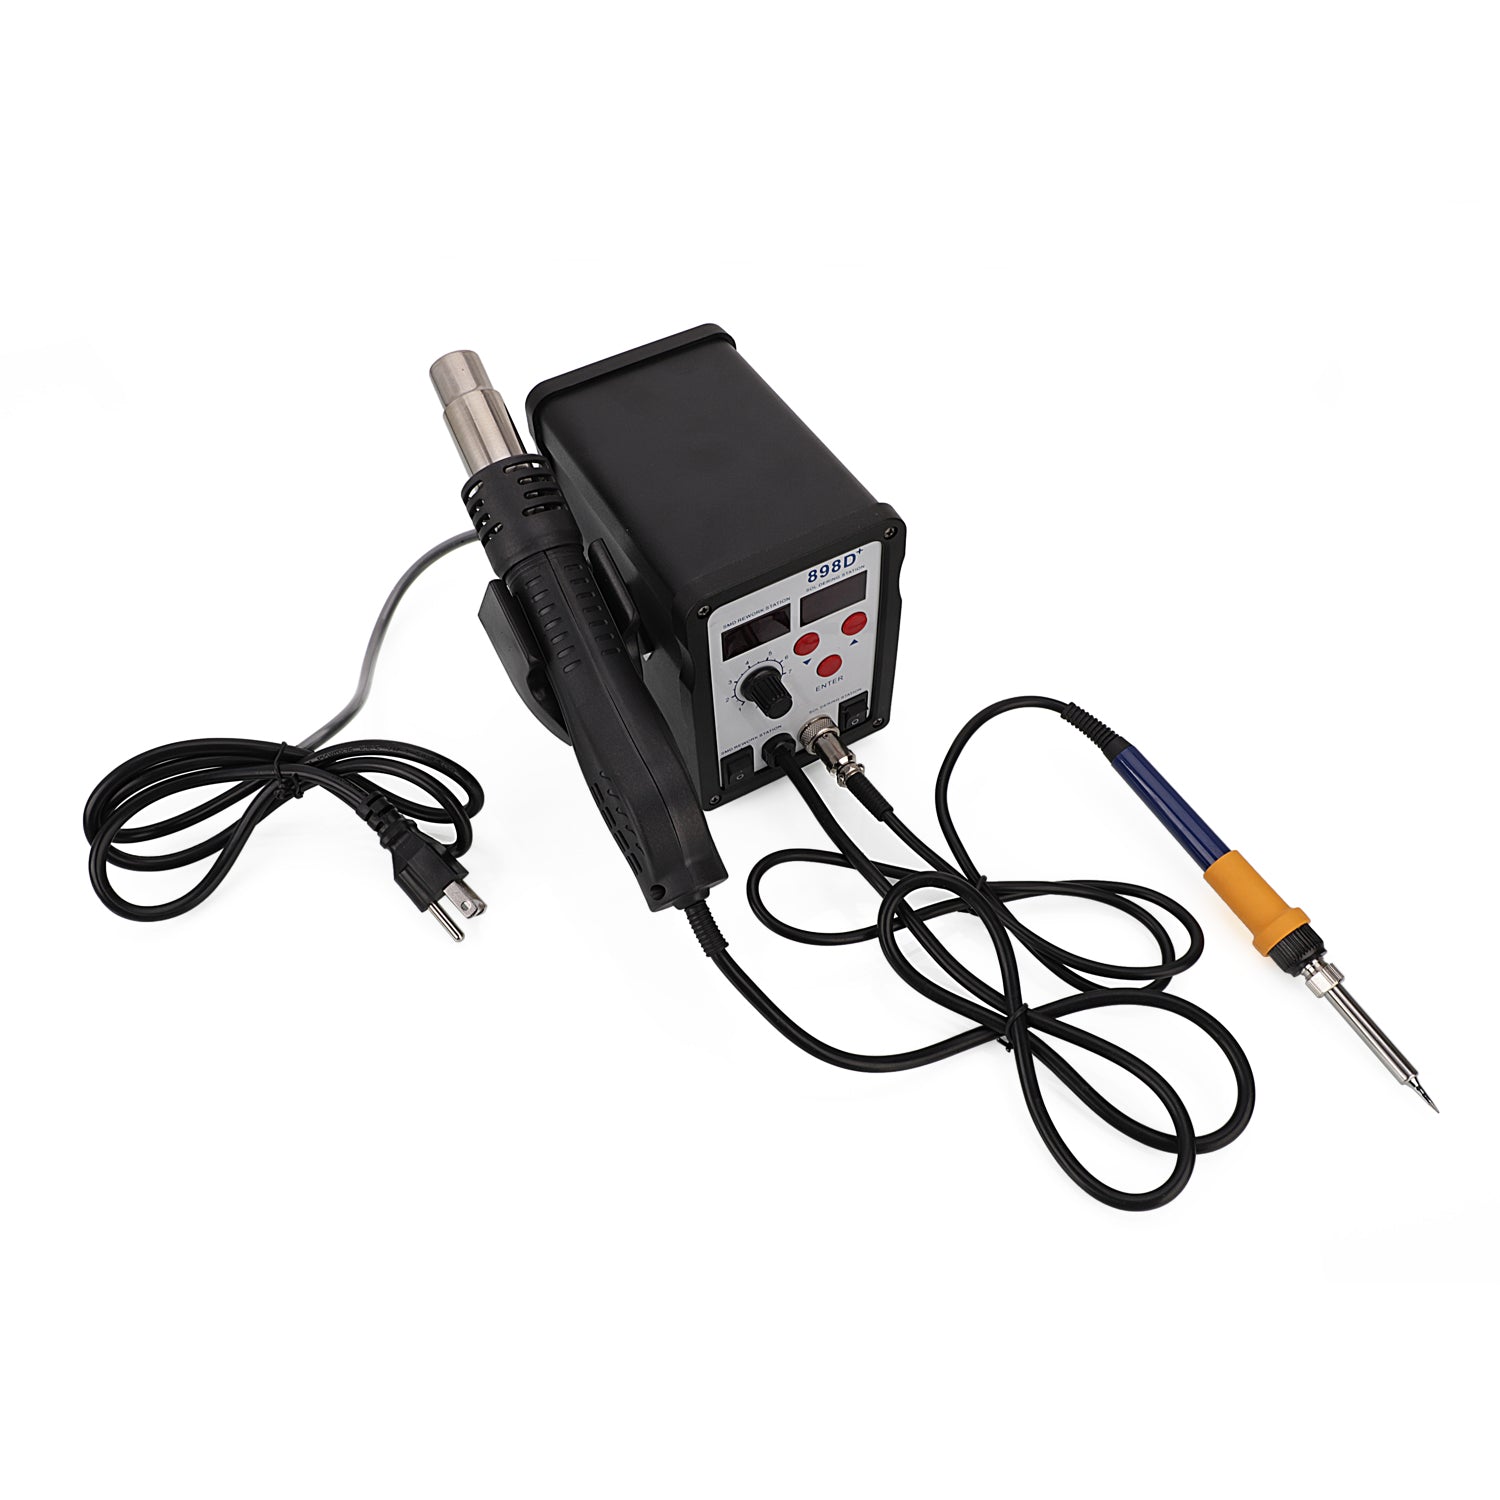 ZNTS 898D 2 in 1 Soldering Station and Hot Air Gun Digital Display Adjustable Soldering Station with 22807905